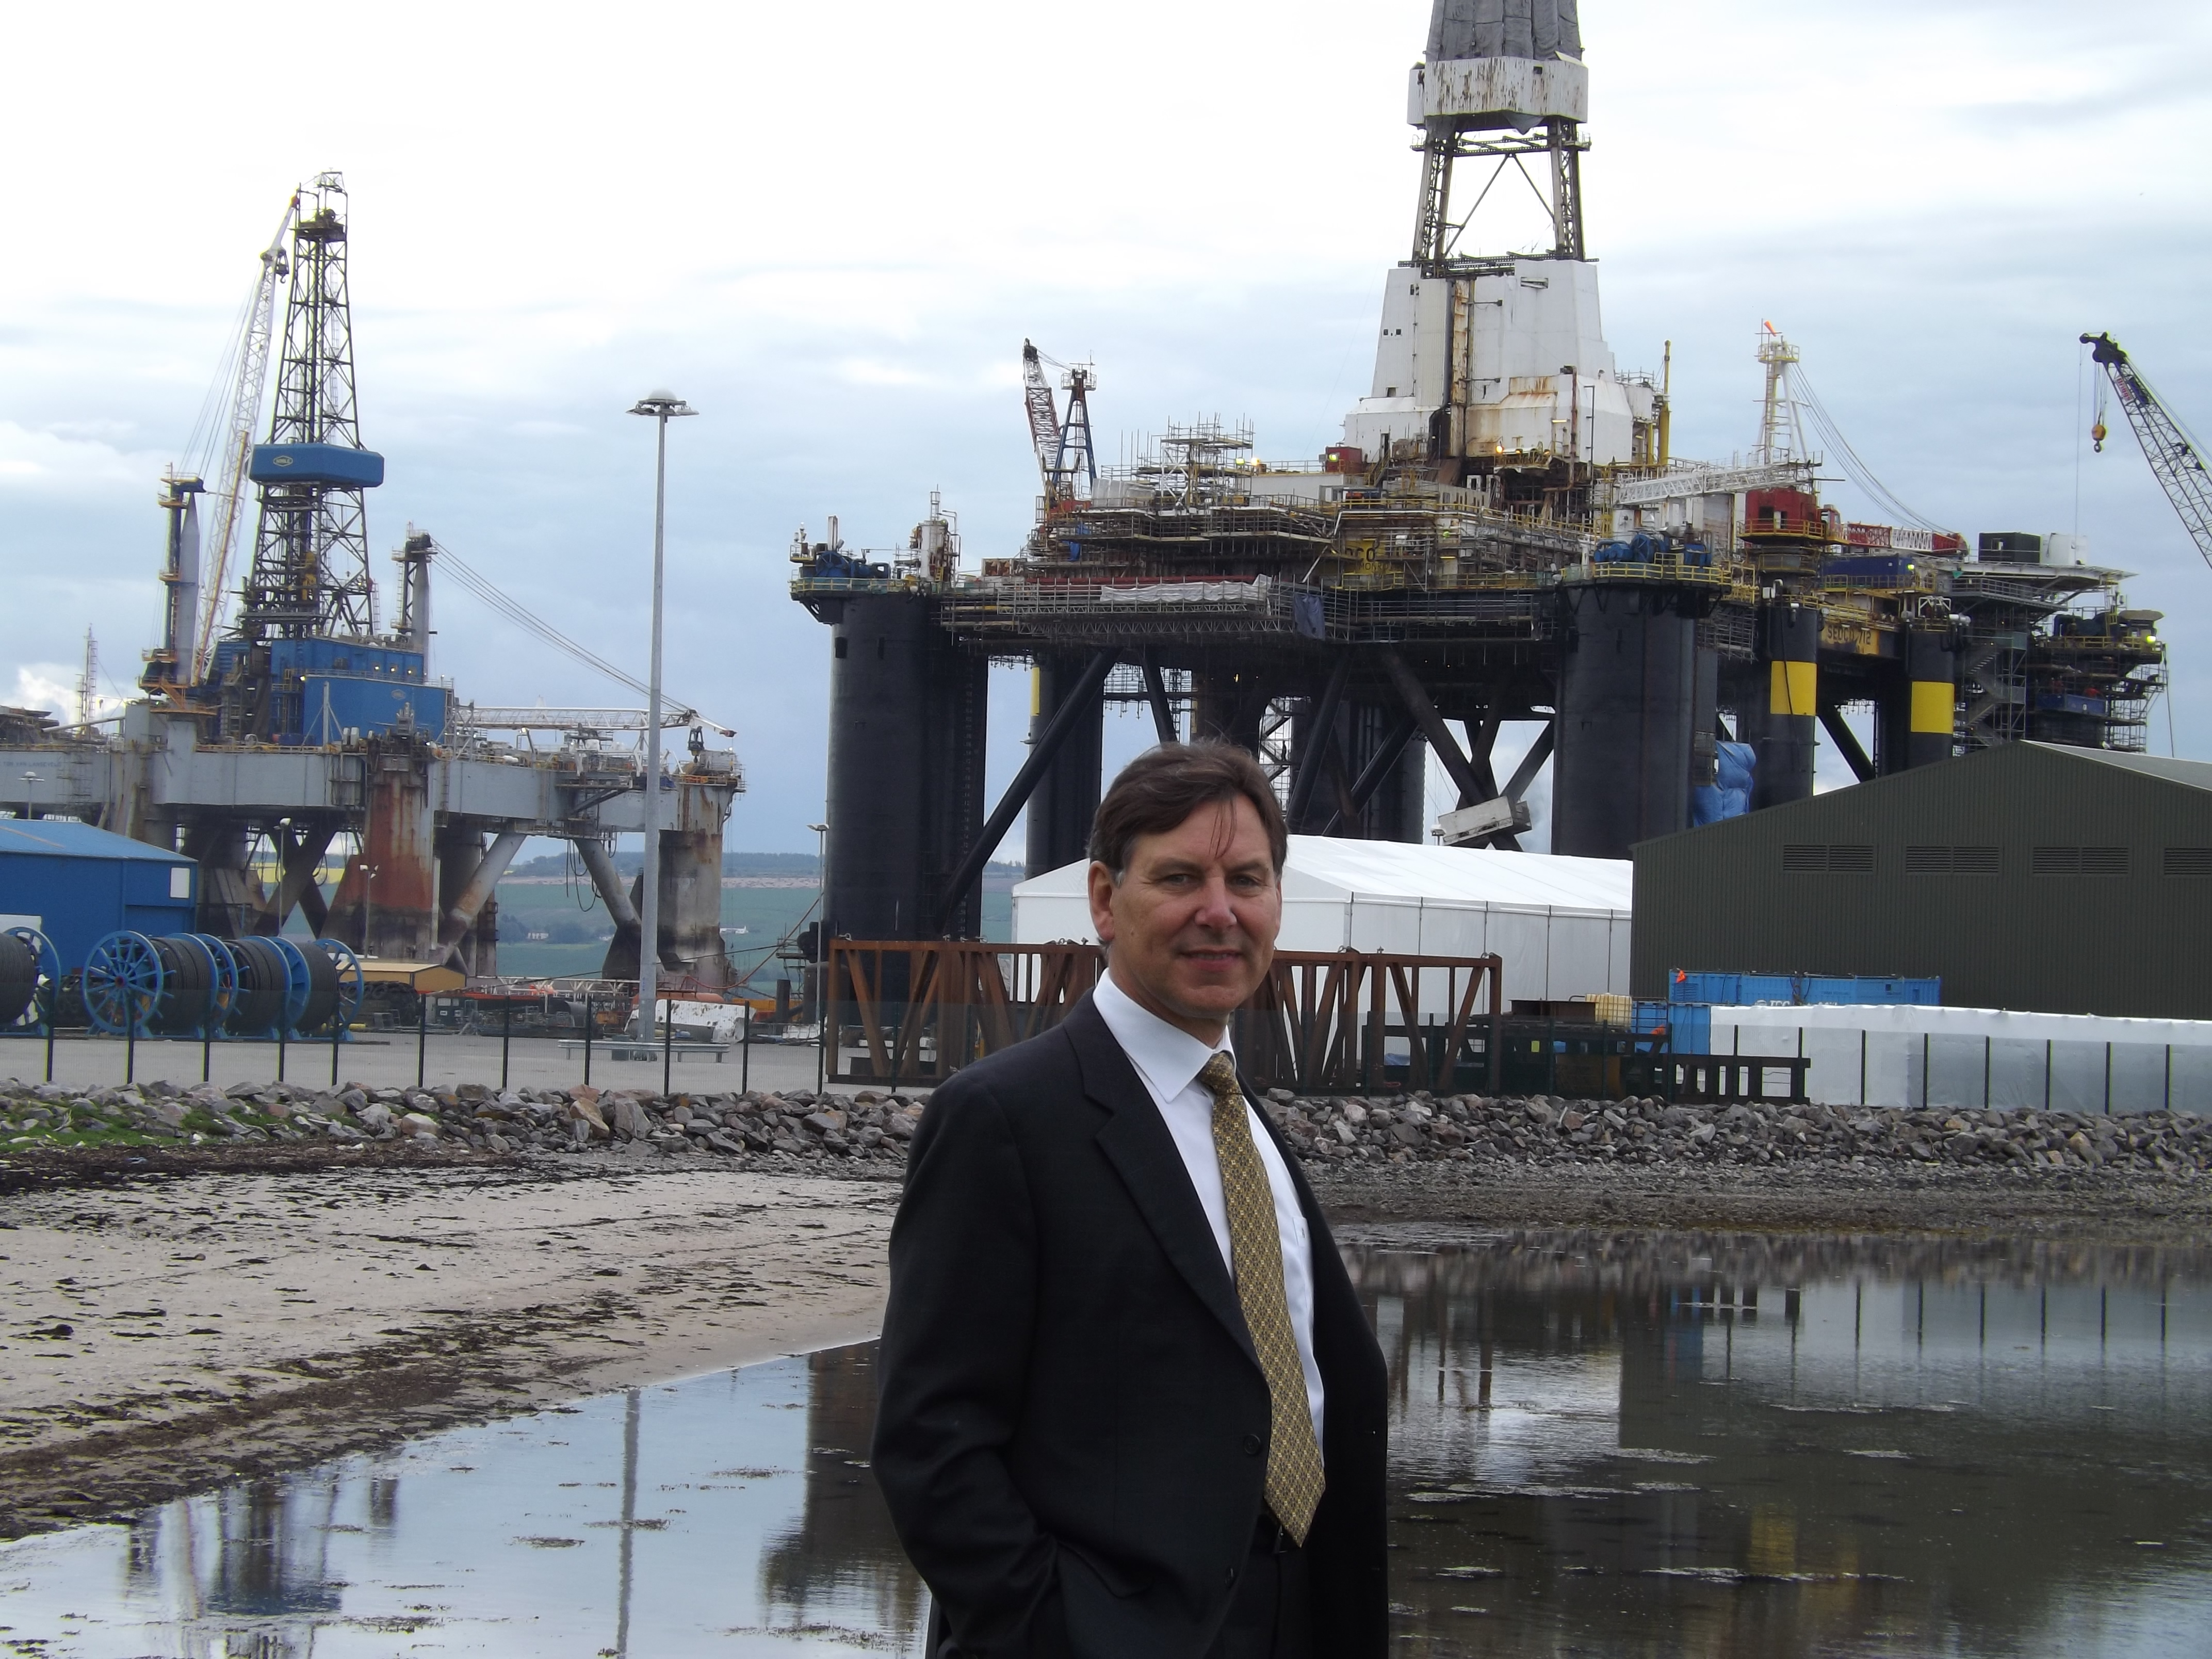 Port of Cromarty Firth (PCF) chief executive, Bob Buskie